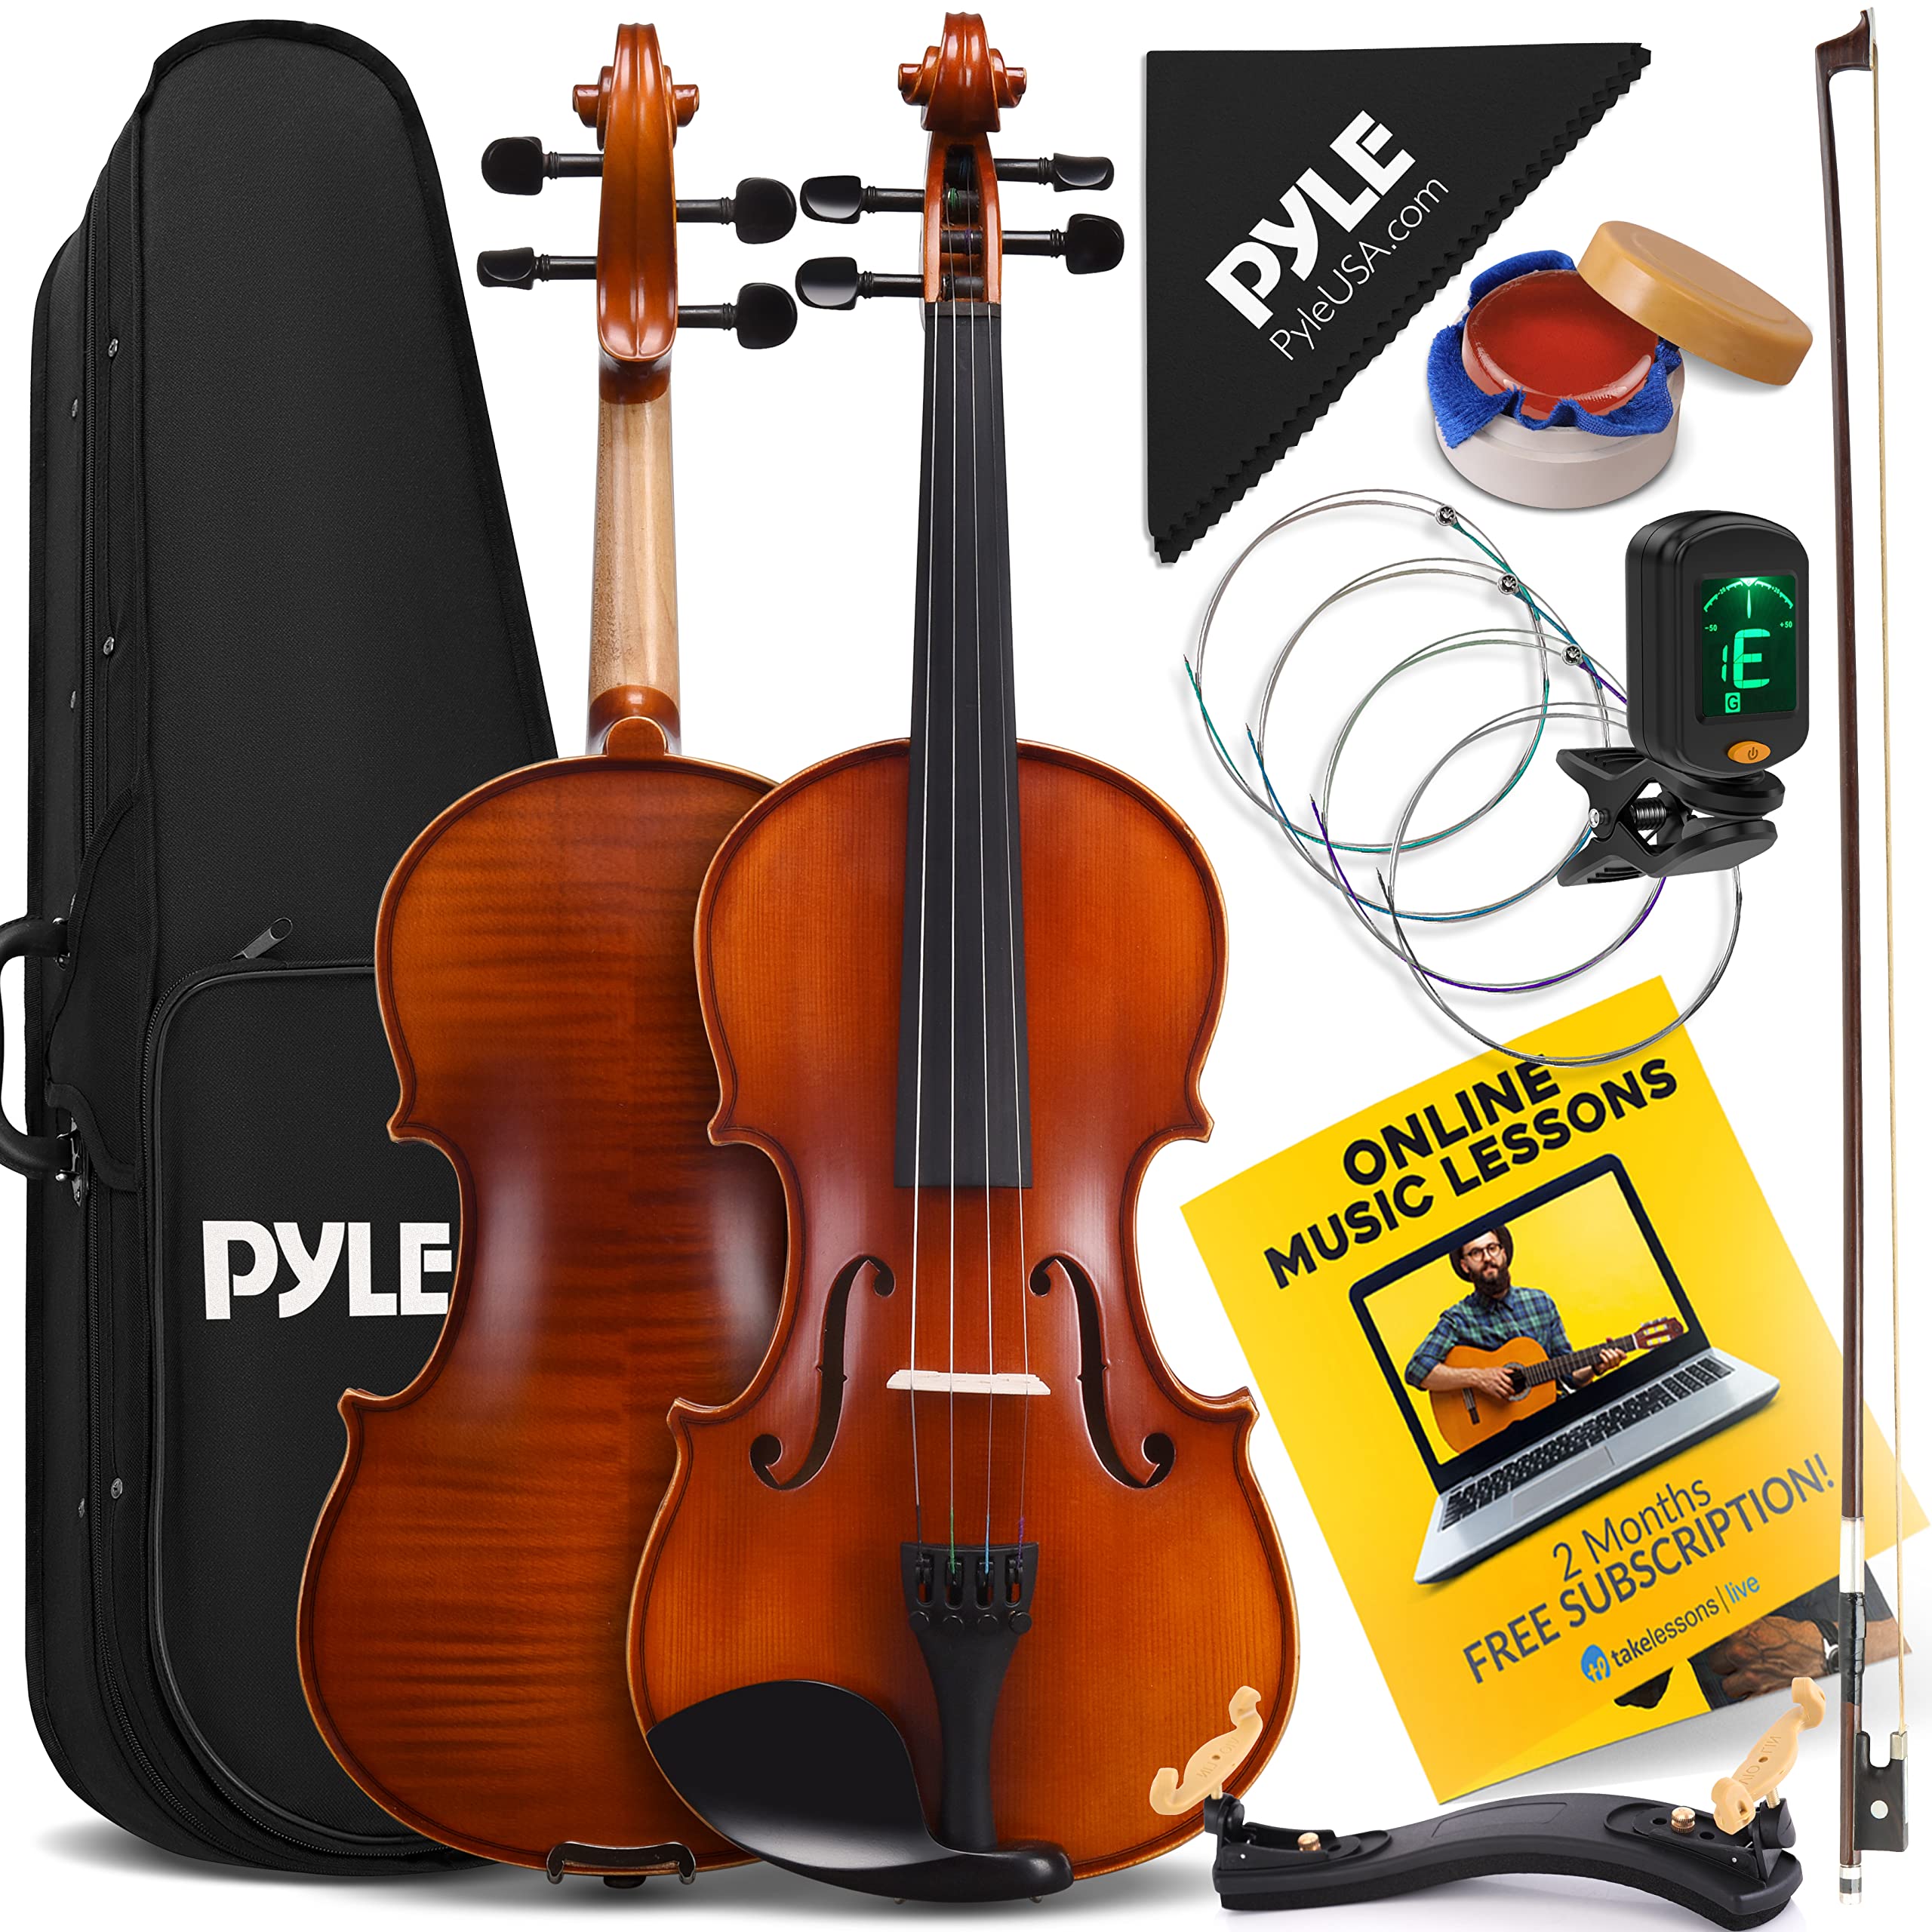 PyleUSA Premium Solid Wood Violin Full Size 4/4 Acoustic Fiddle Set Orchestral Stringed Musical Instrument Kit, Online Lessons, Hard Case, Bow, Tuner, 4 Student Beginner to Advanced Adult, (PGVILN100)